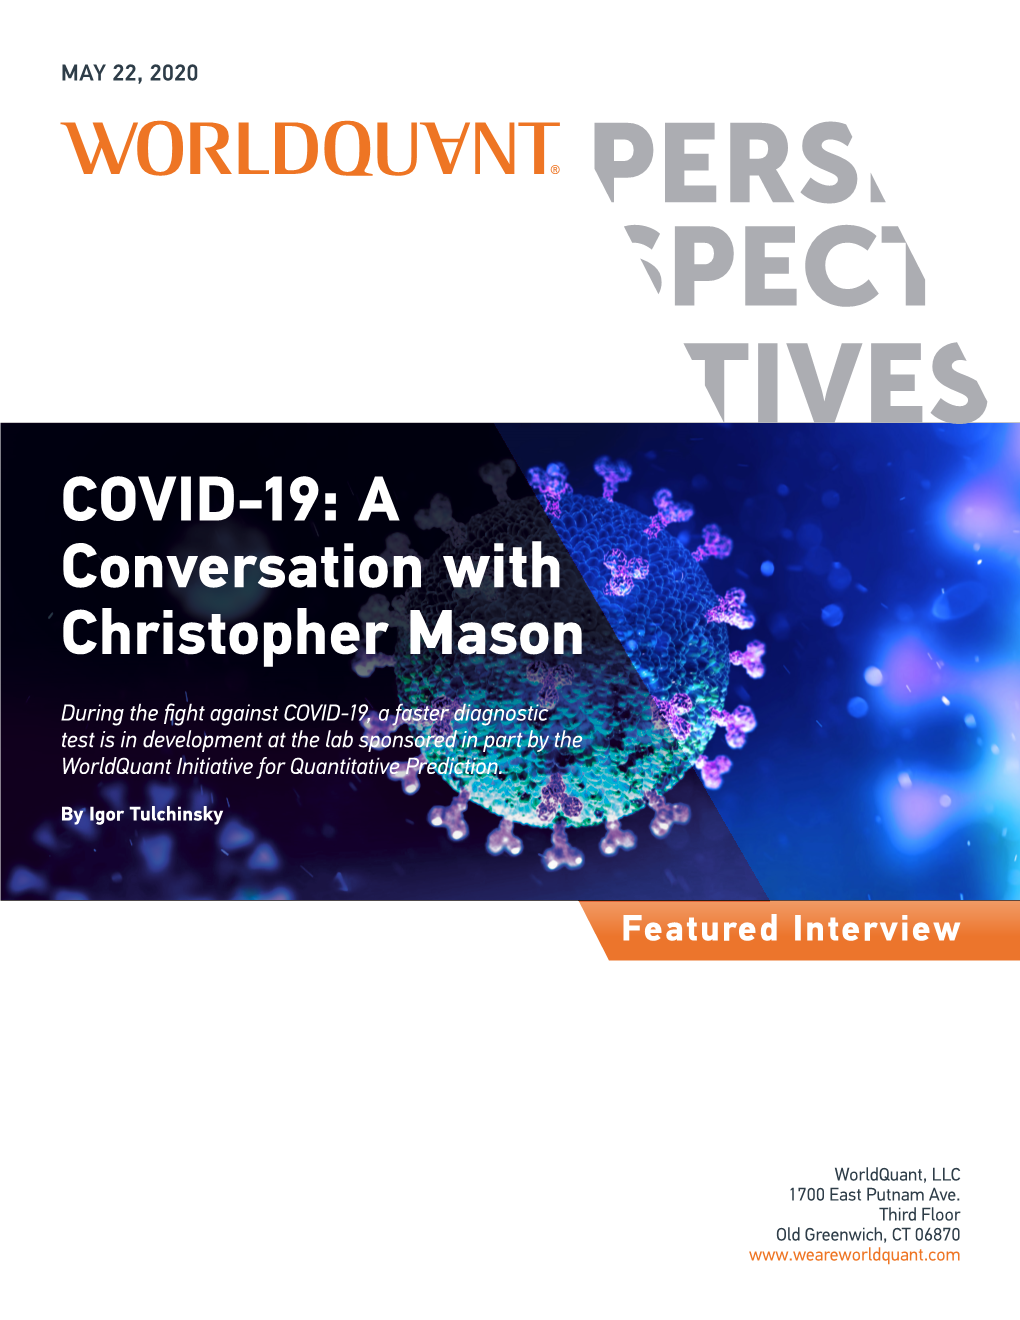 COVID-19: a Conversation with Christopher Mason